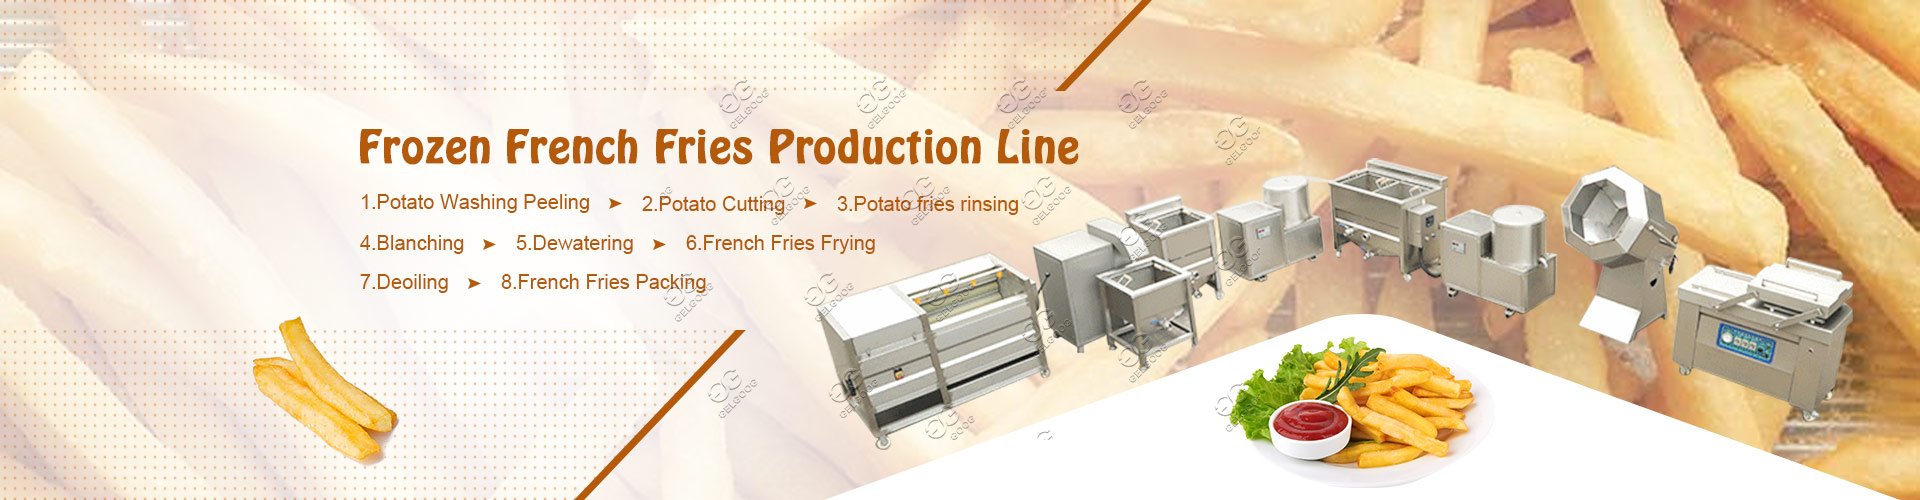 Small Scale Frozen French Fries Production Line 70 kg/h